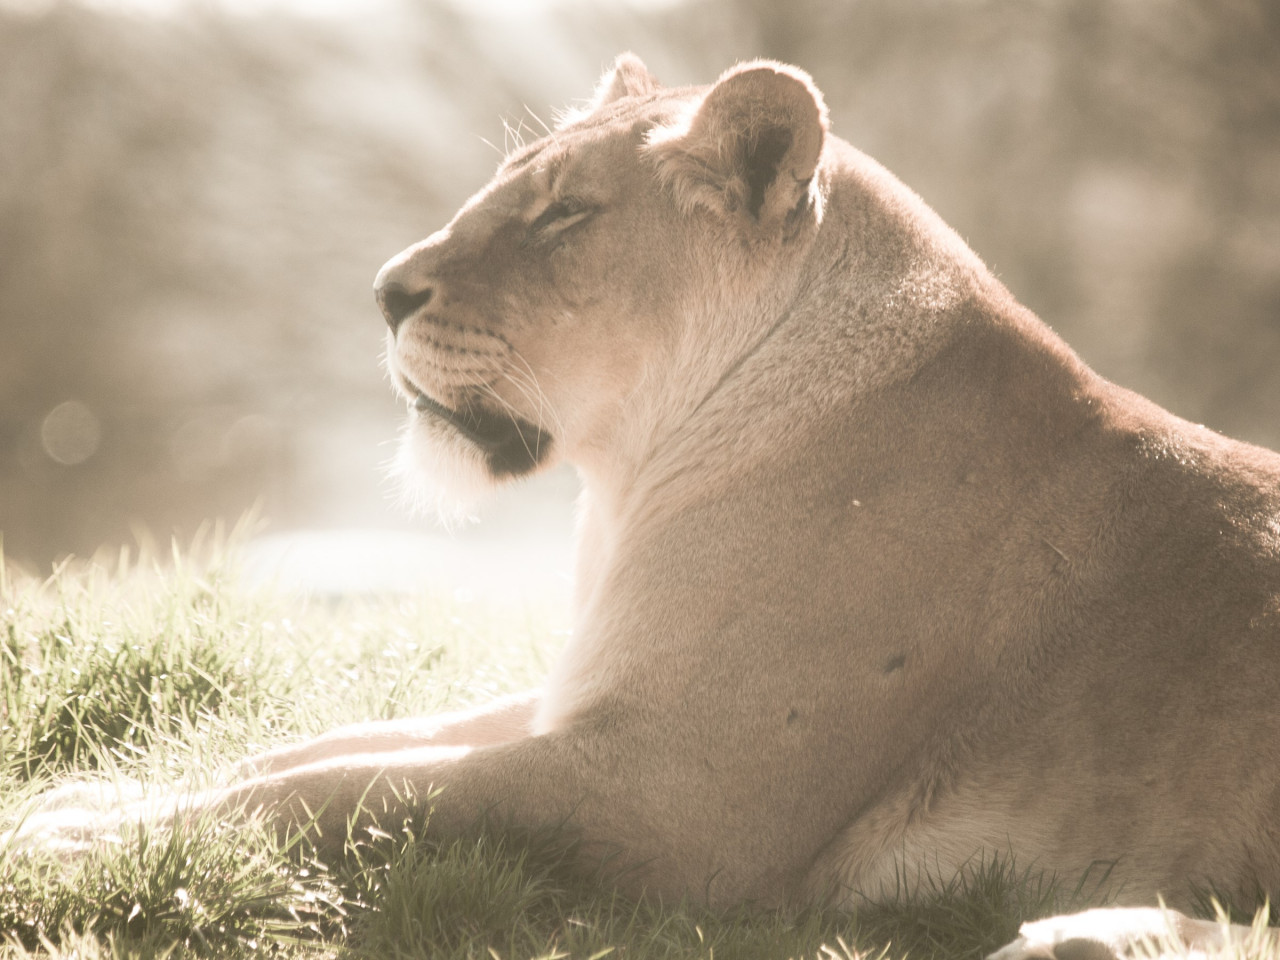 Lioness at Whipsnade Zoo wallpaper 1280x960